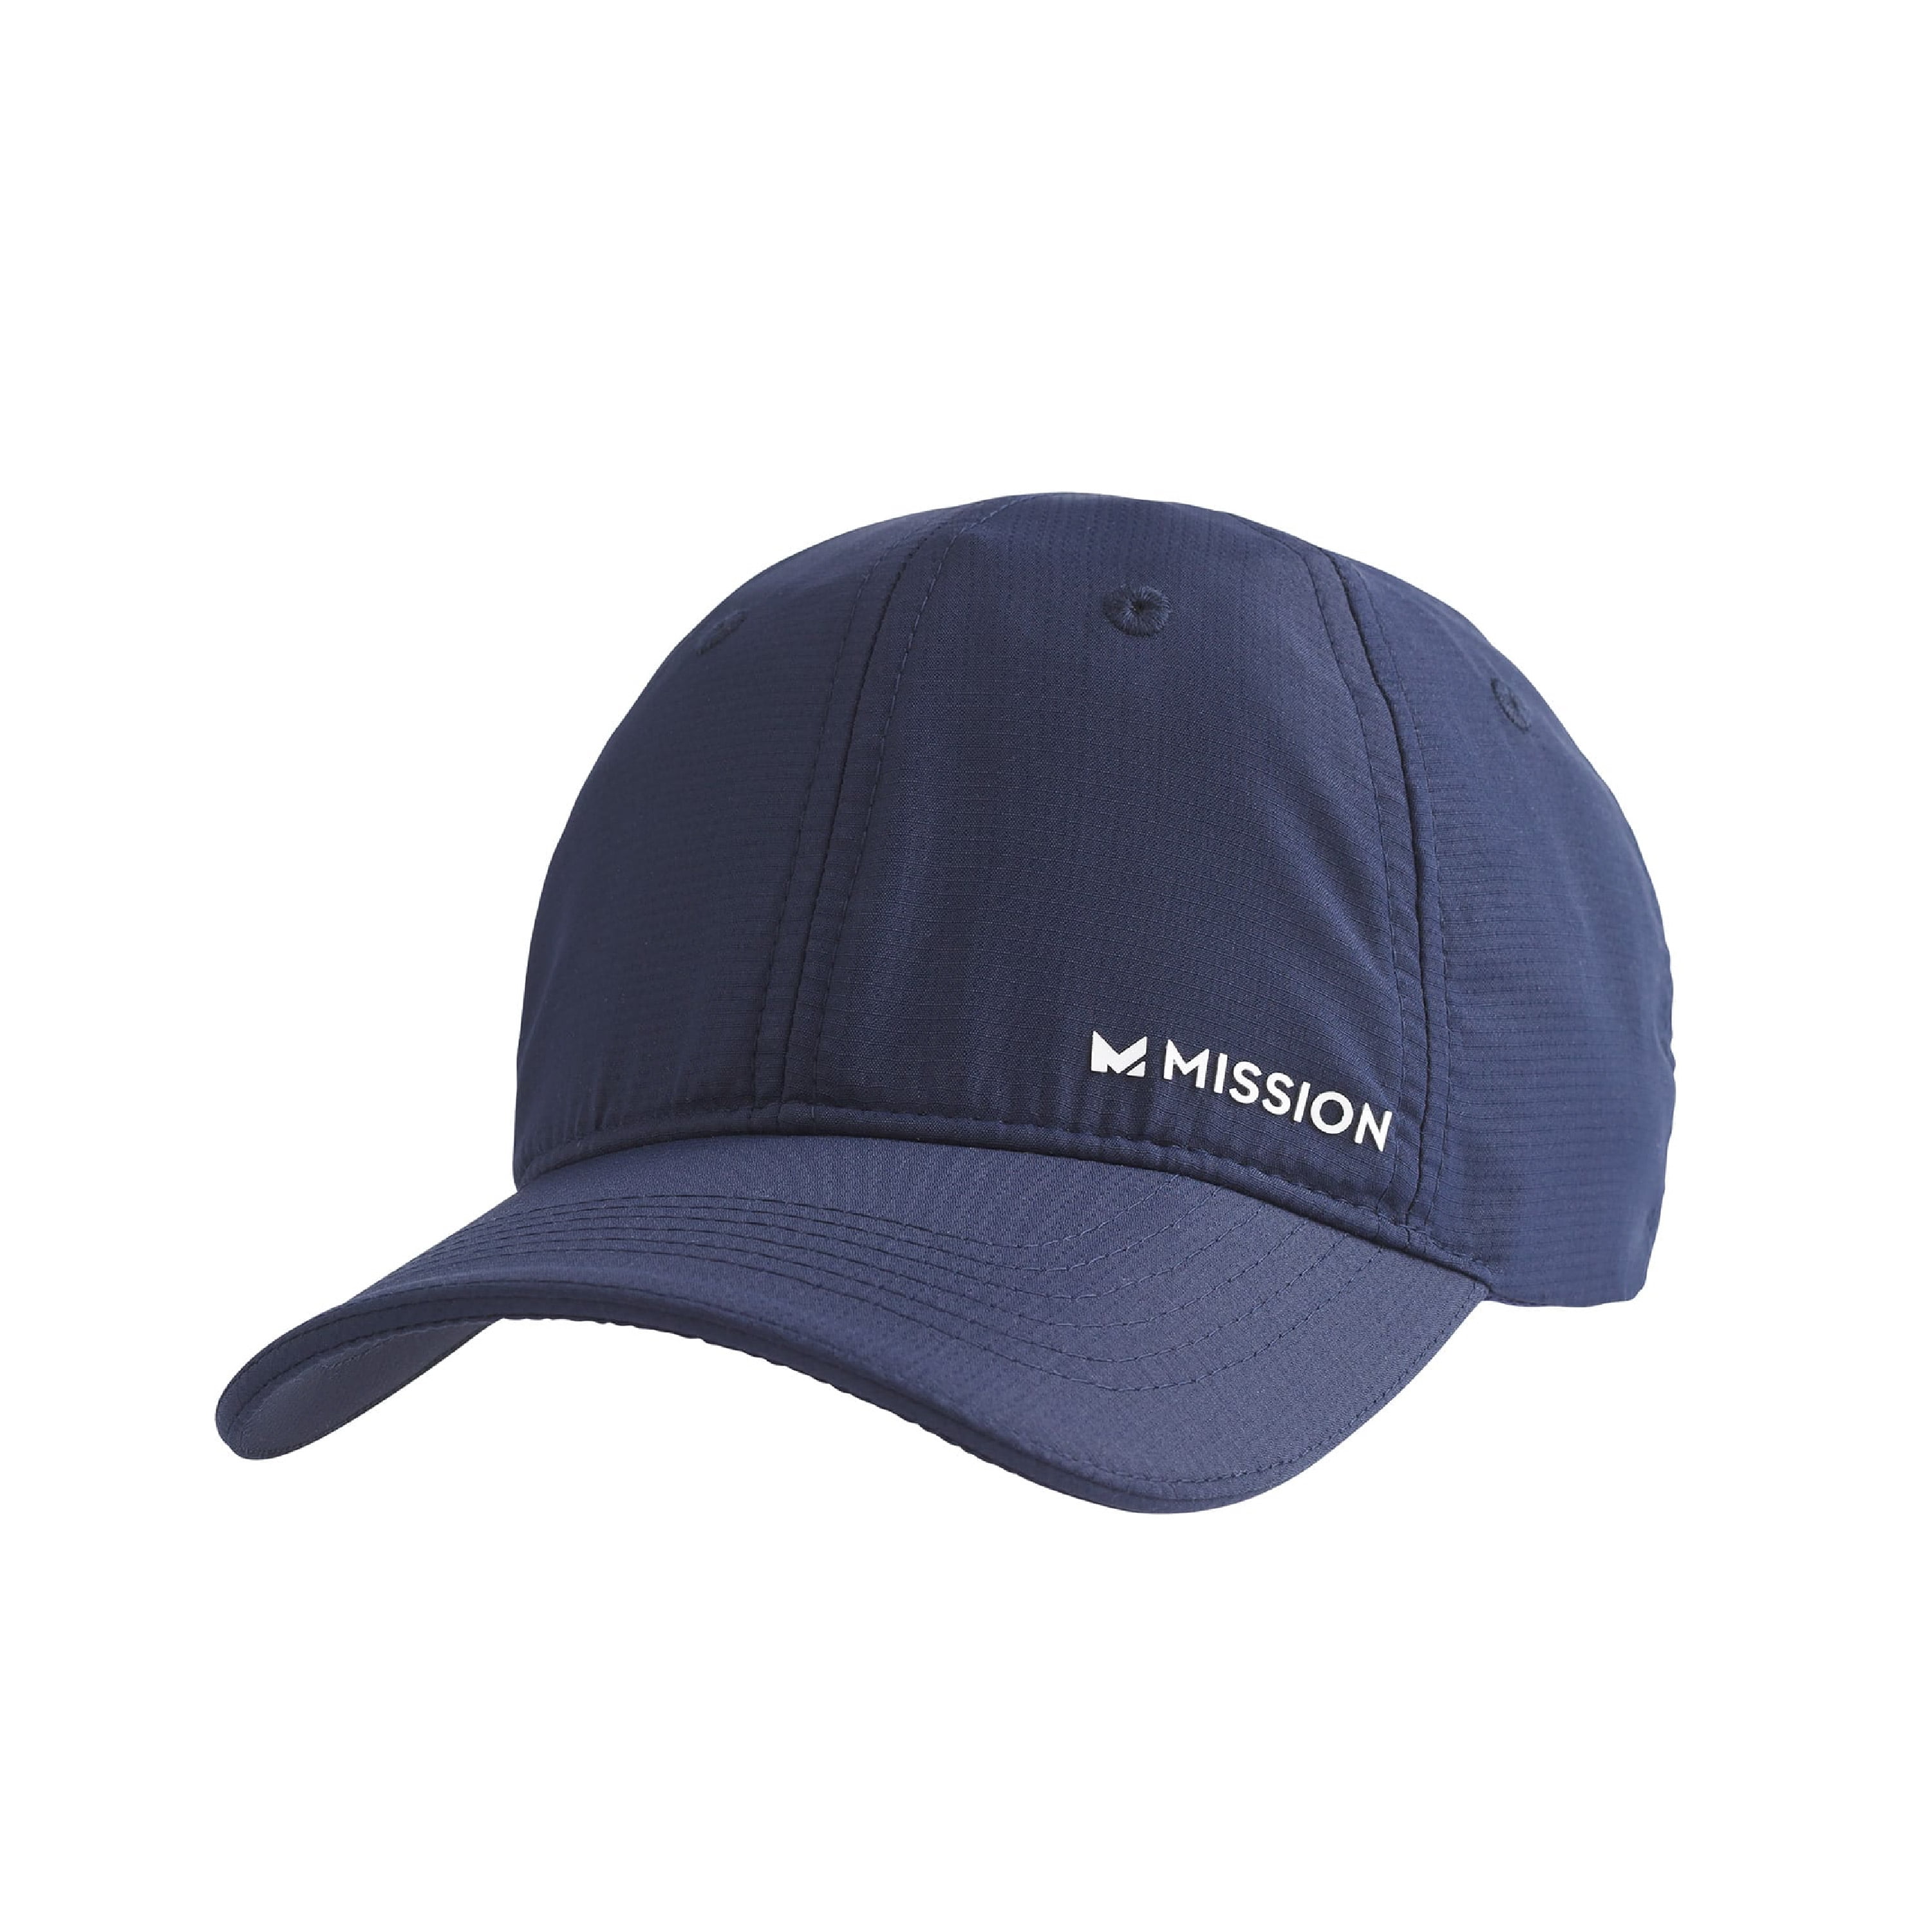 Mission Cooling Performance Hat Adult unisex Baseball Cap, Cools When Wet, UPF 50, Navy, Size: One size, Blue